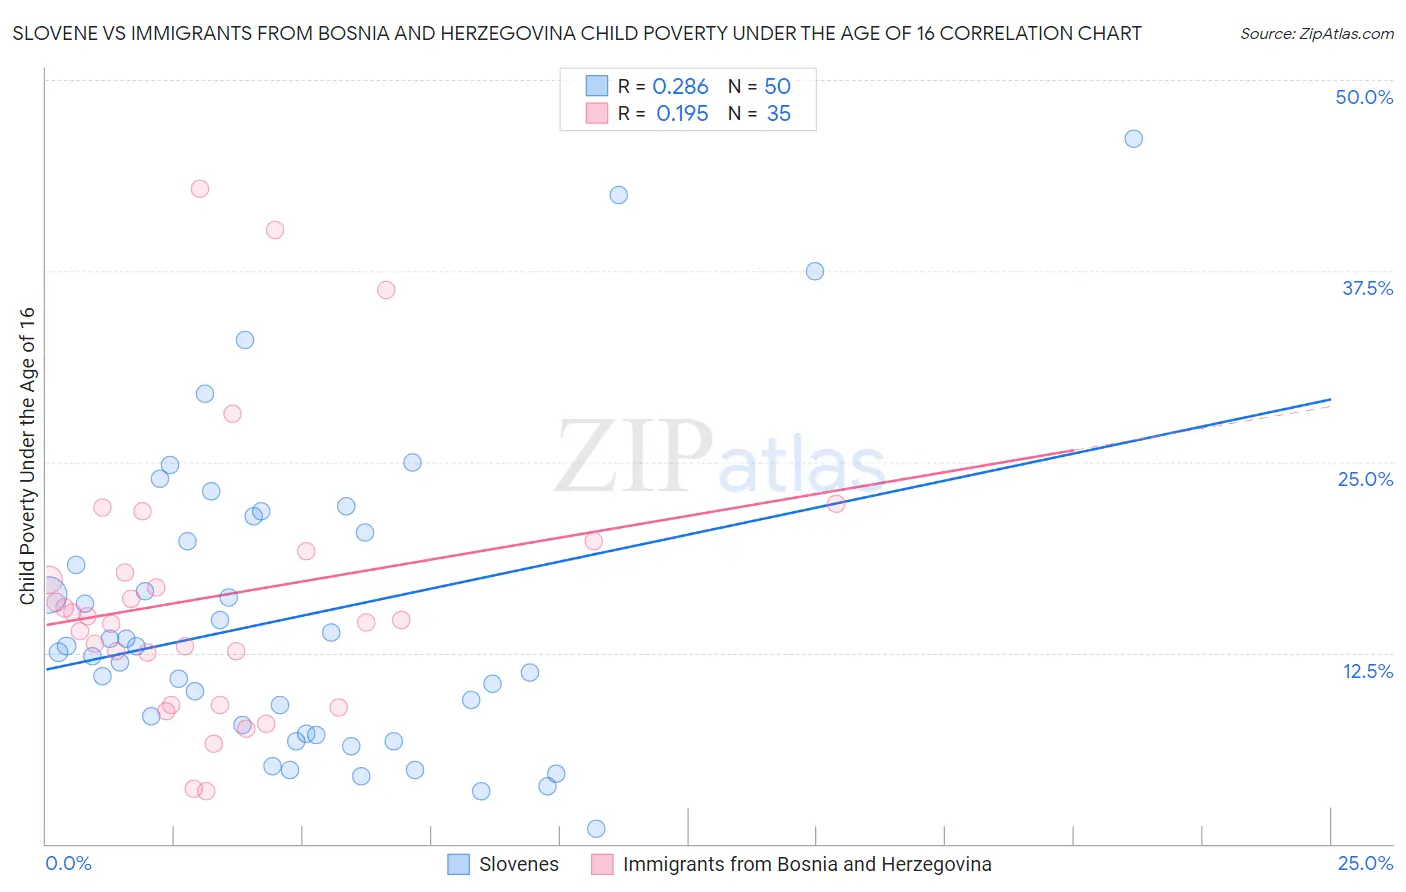 Slovene vs Immigrants from Bosnia and Herzegovina Child Poverty Under the Age of 16